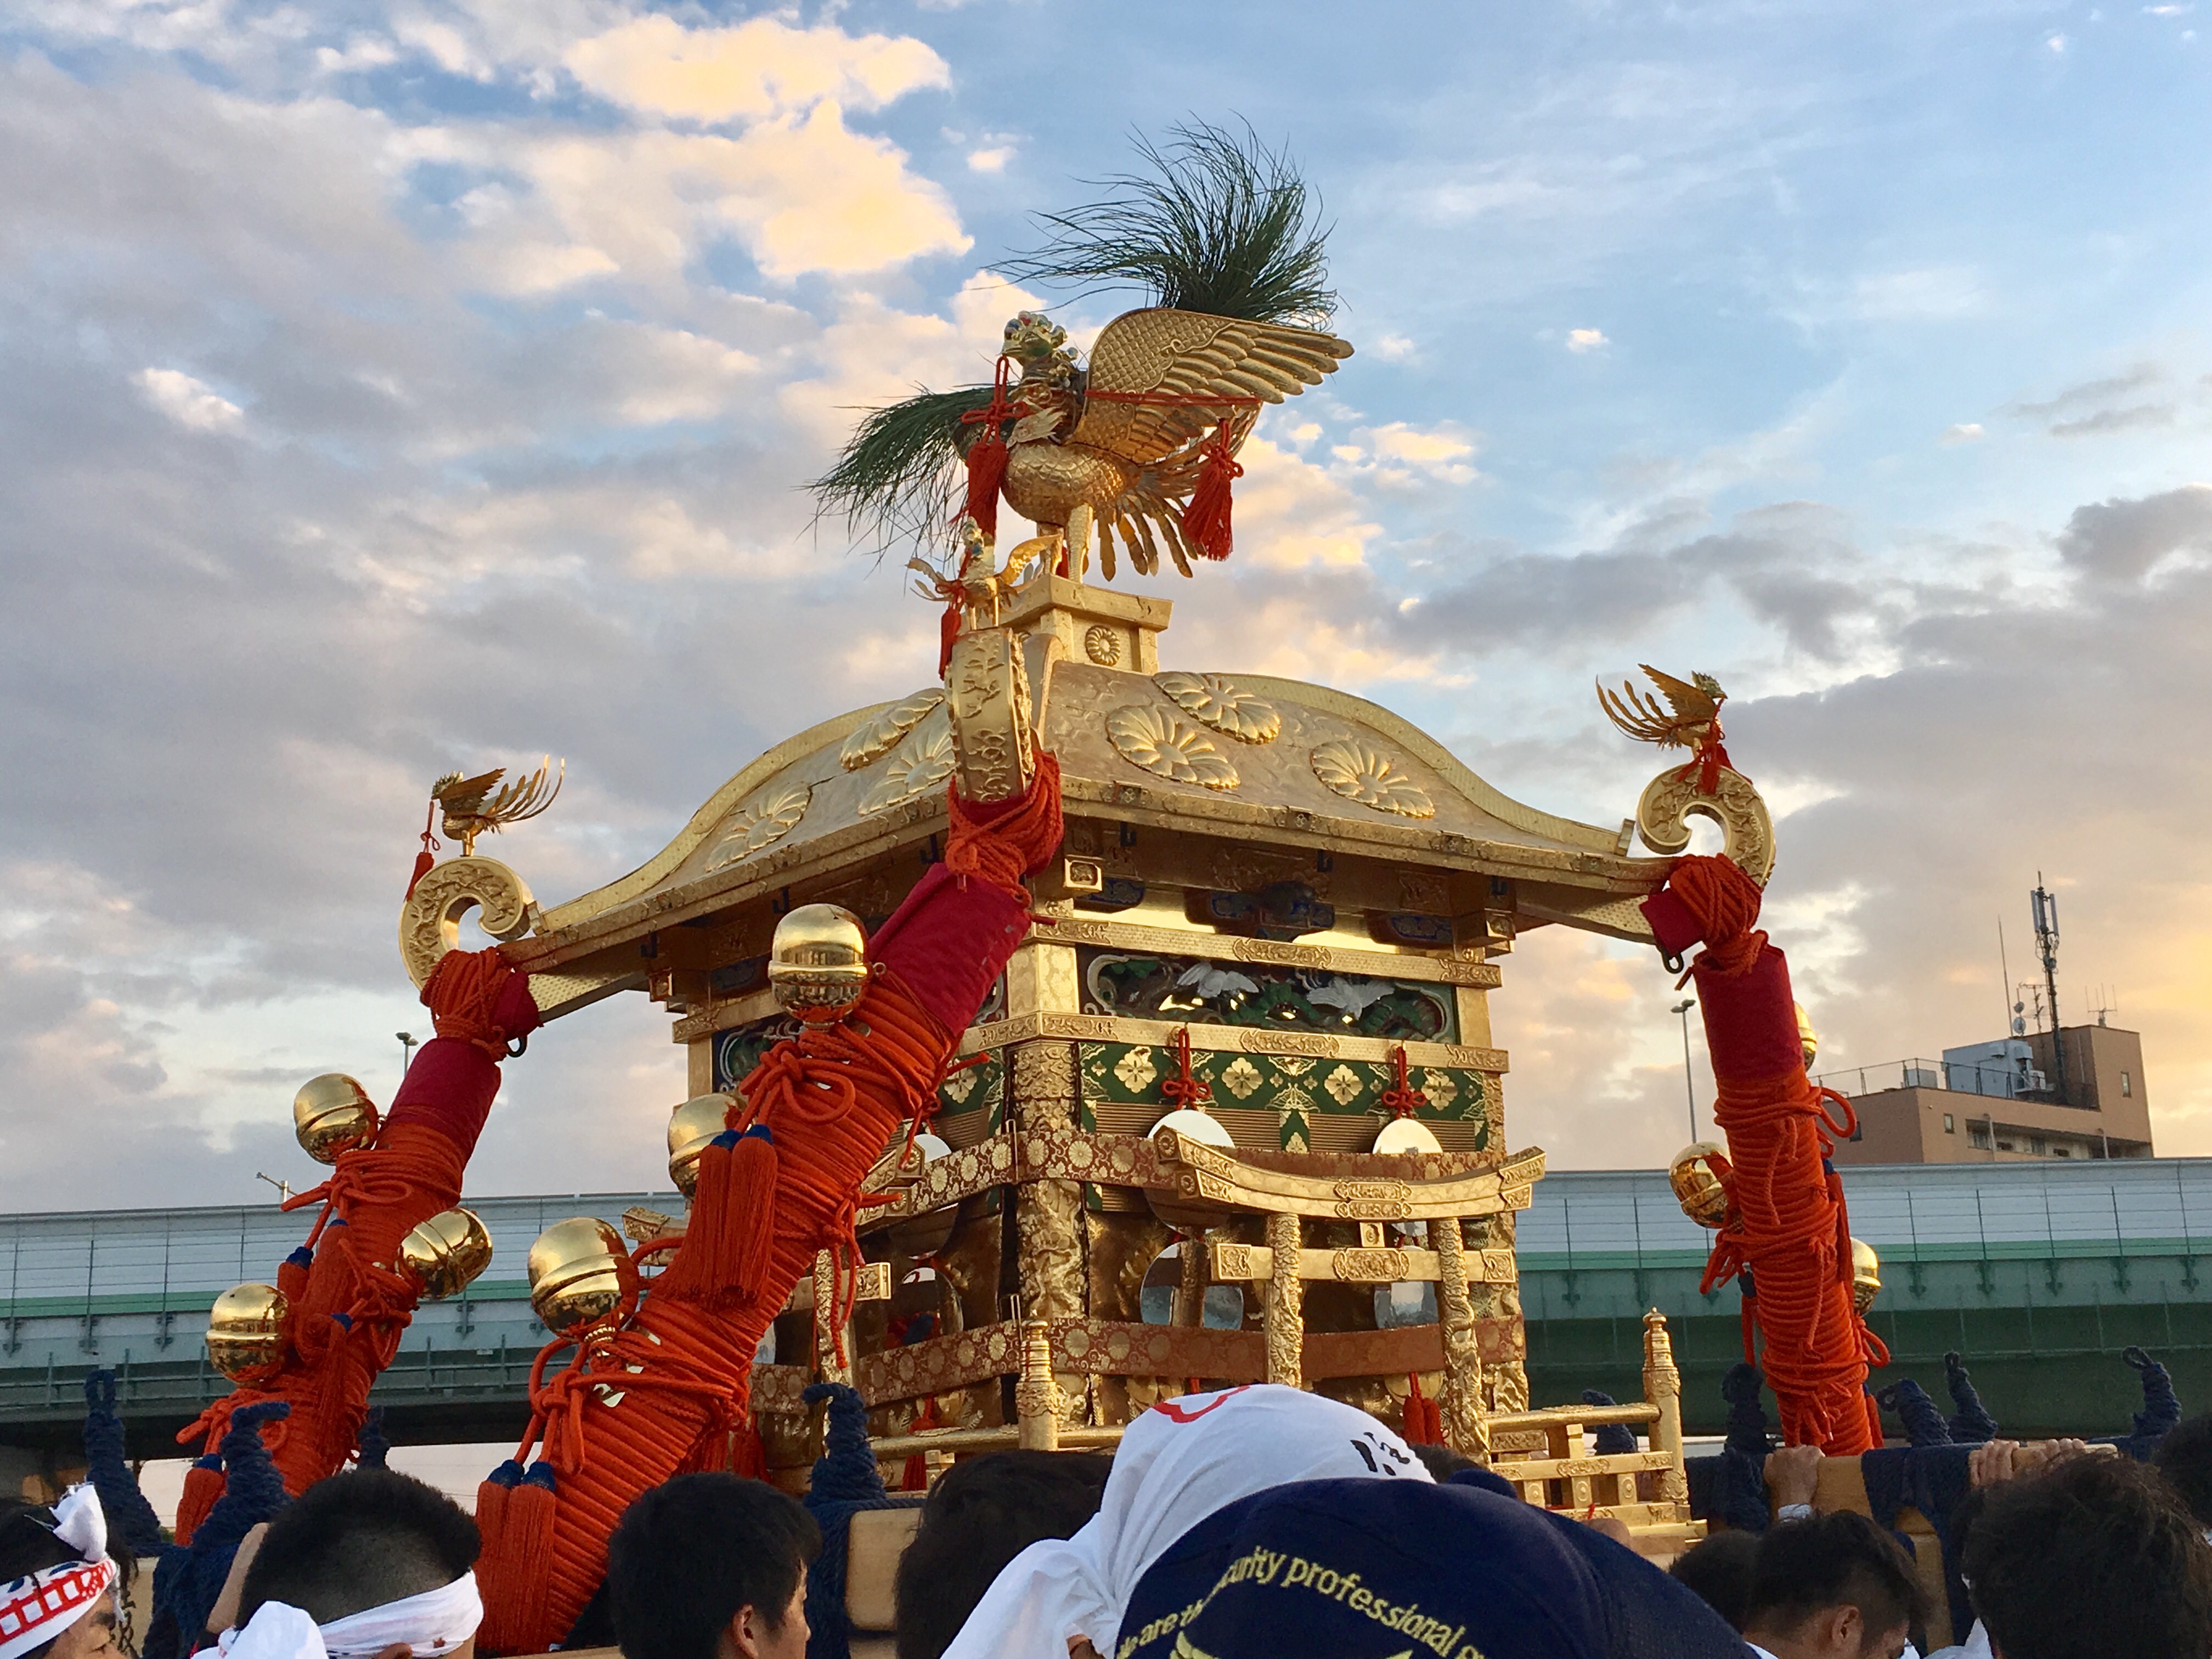 golden portable shrine with statue of large bird on top at sunset